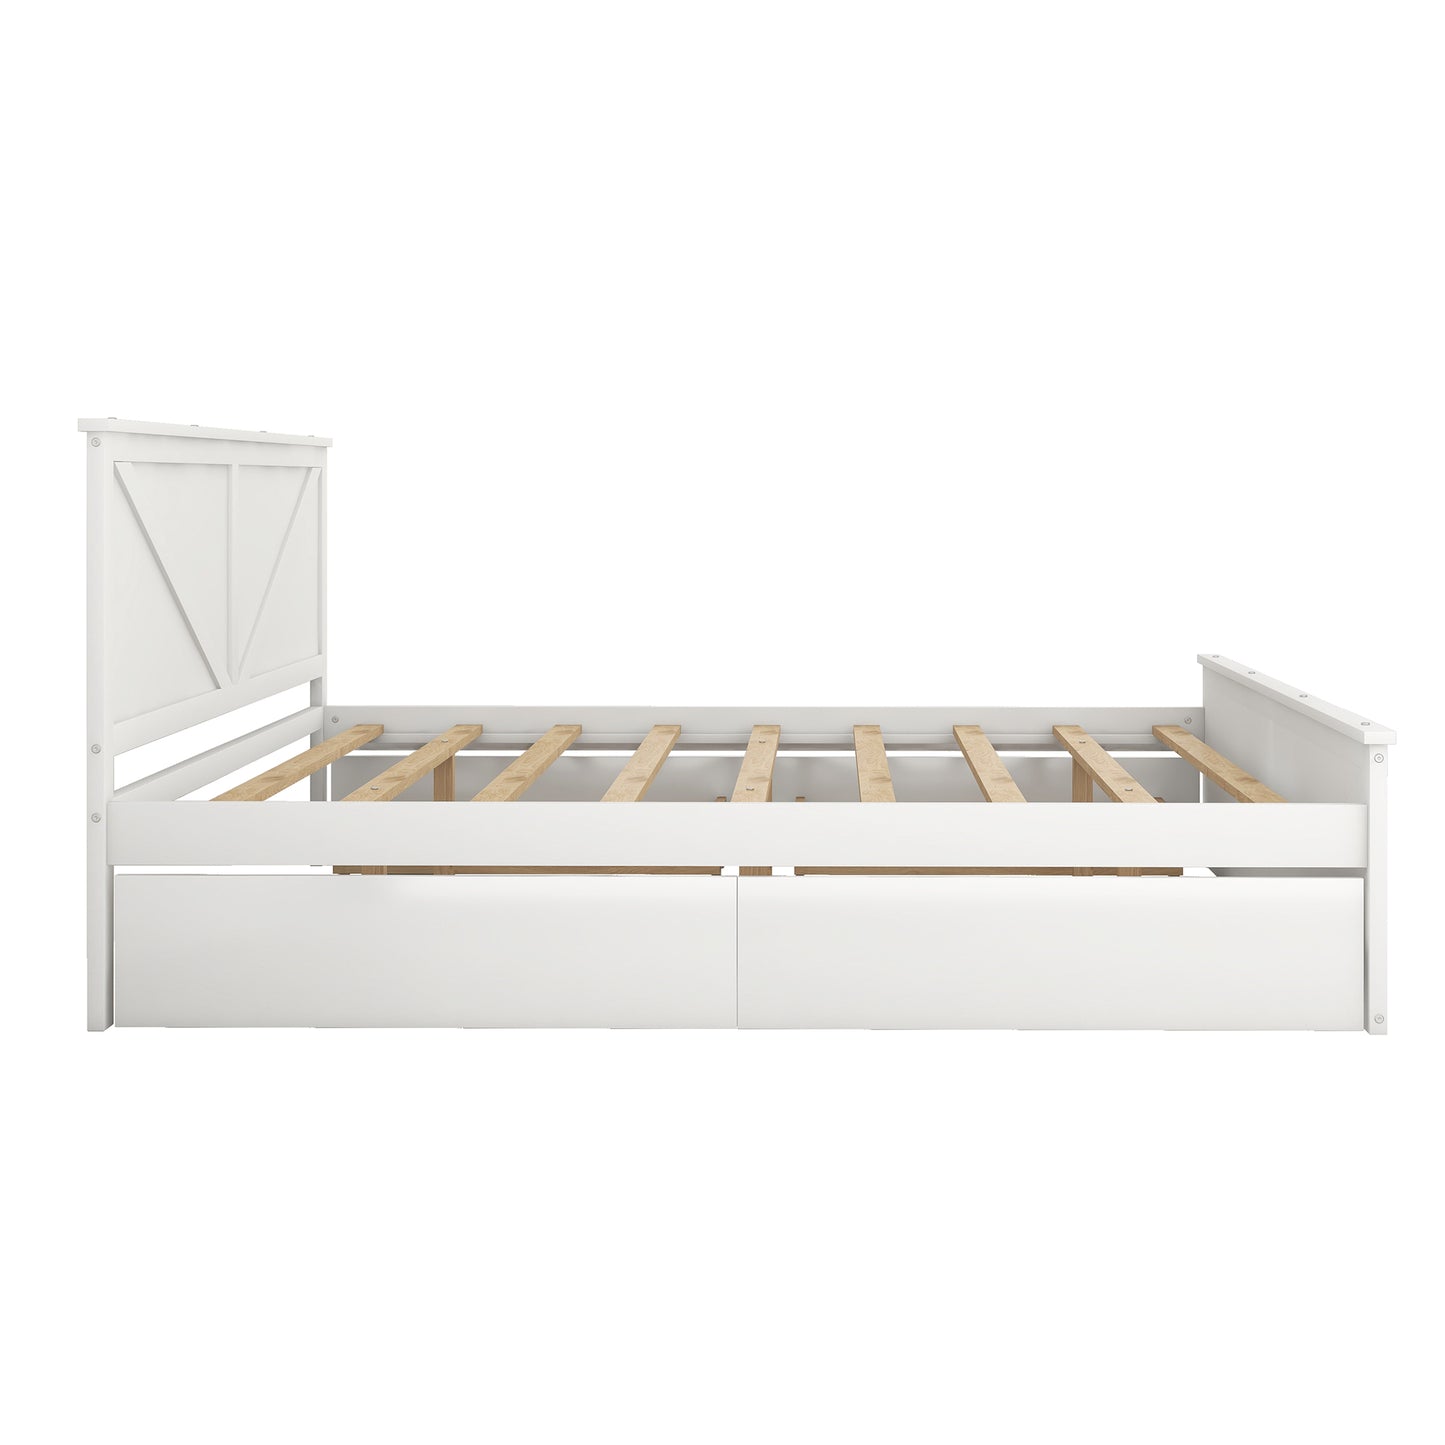 King Size Wooden Platform Bed with Four Storage Drawers and Support Legs, White